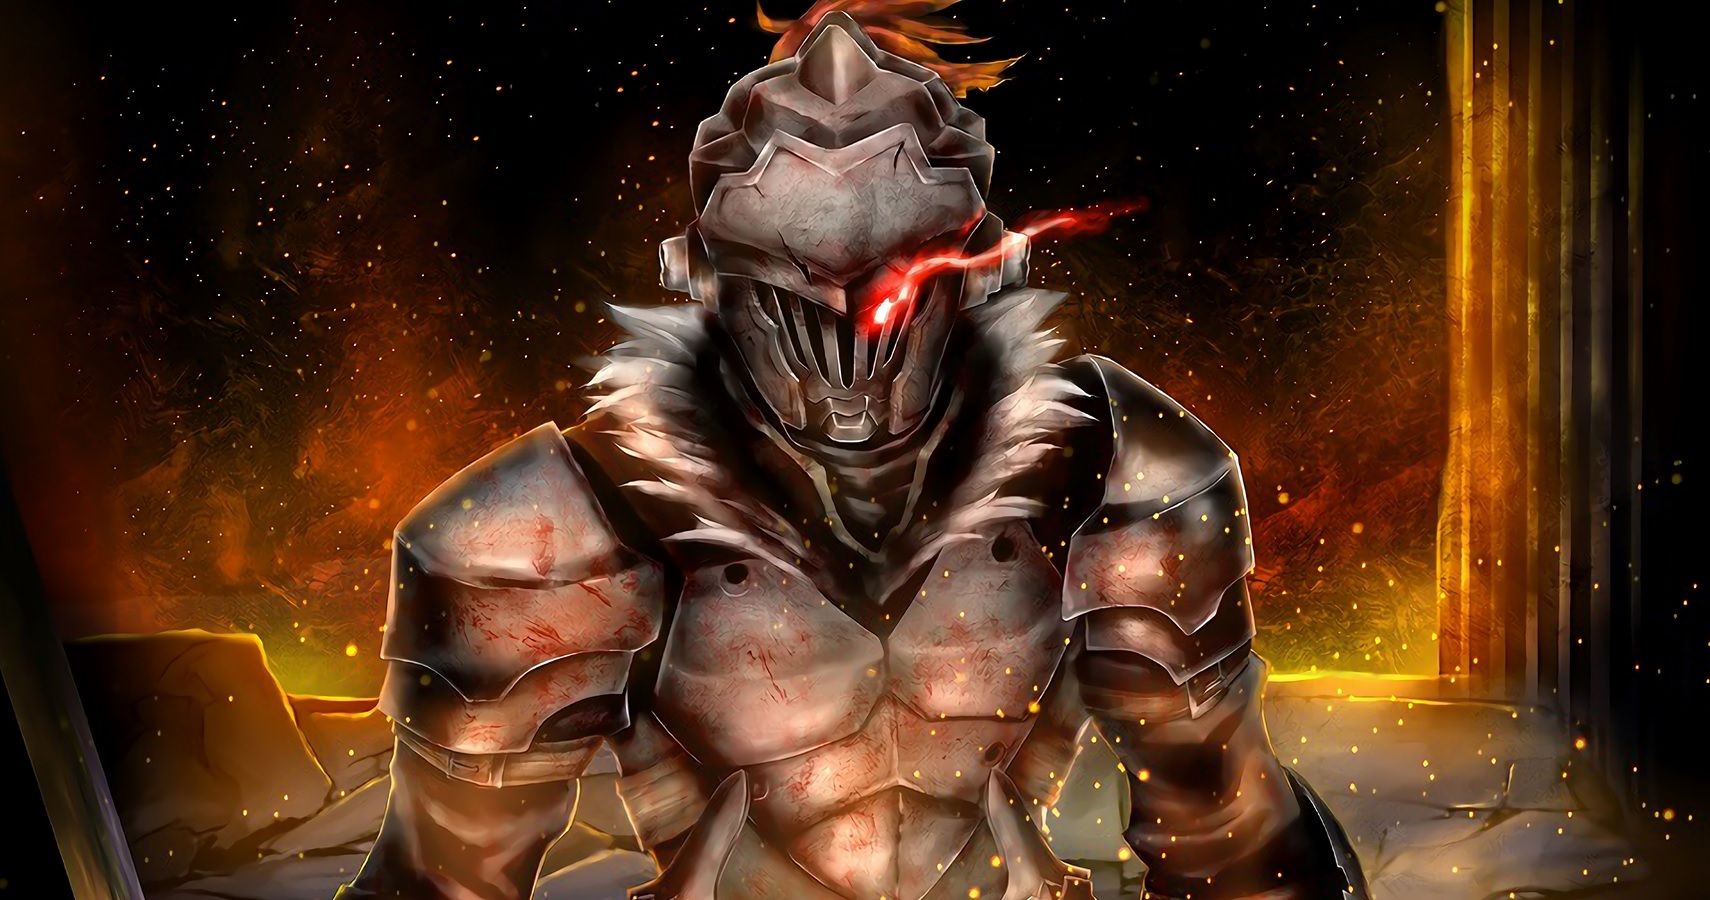 10 manga to read for fans of Goblin Slayer